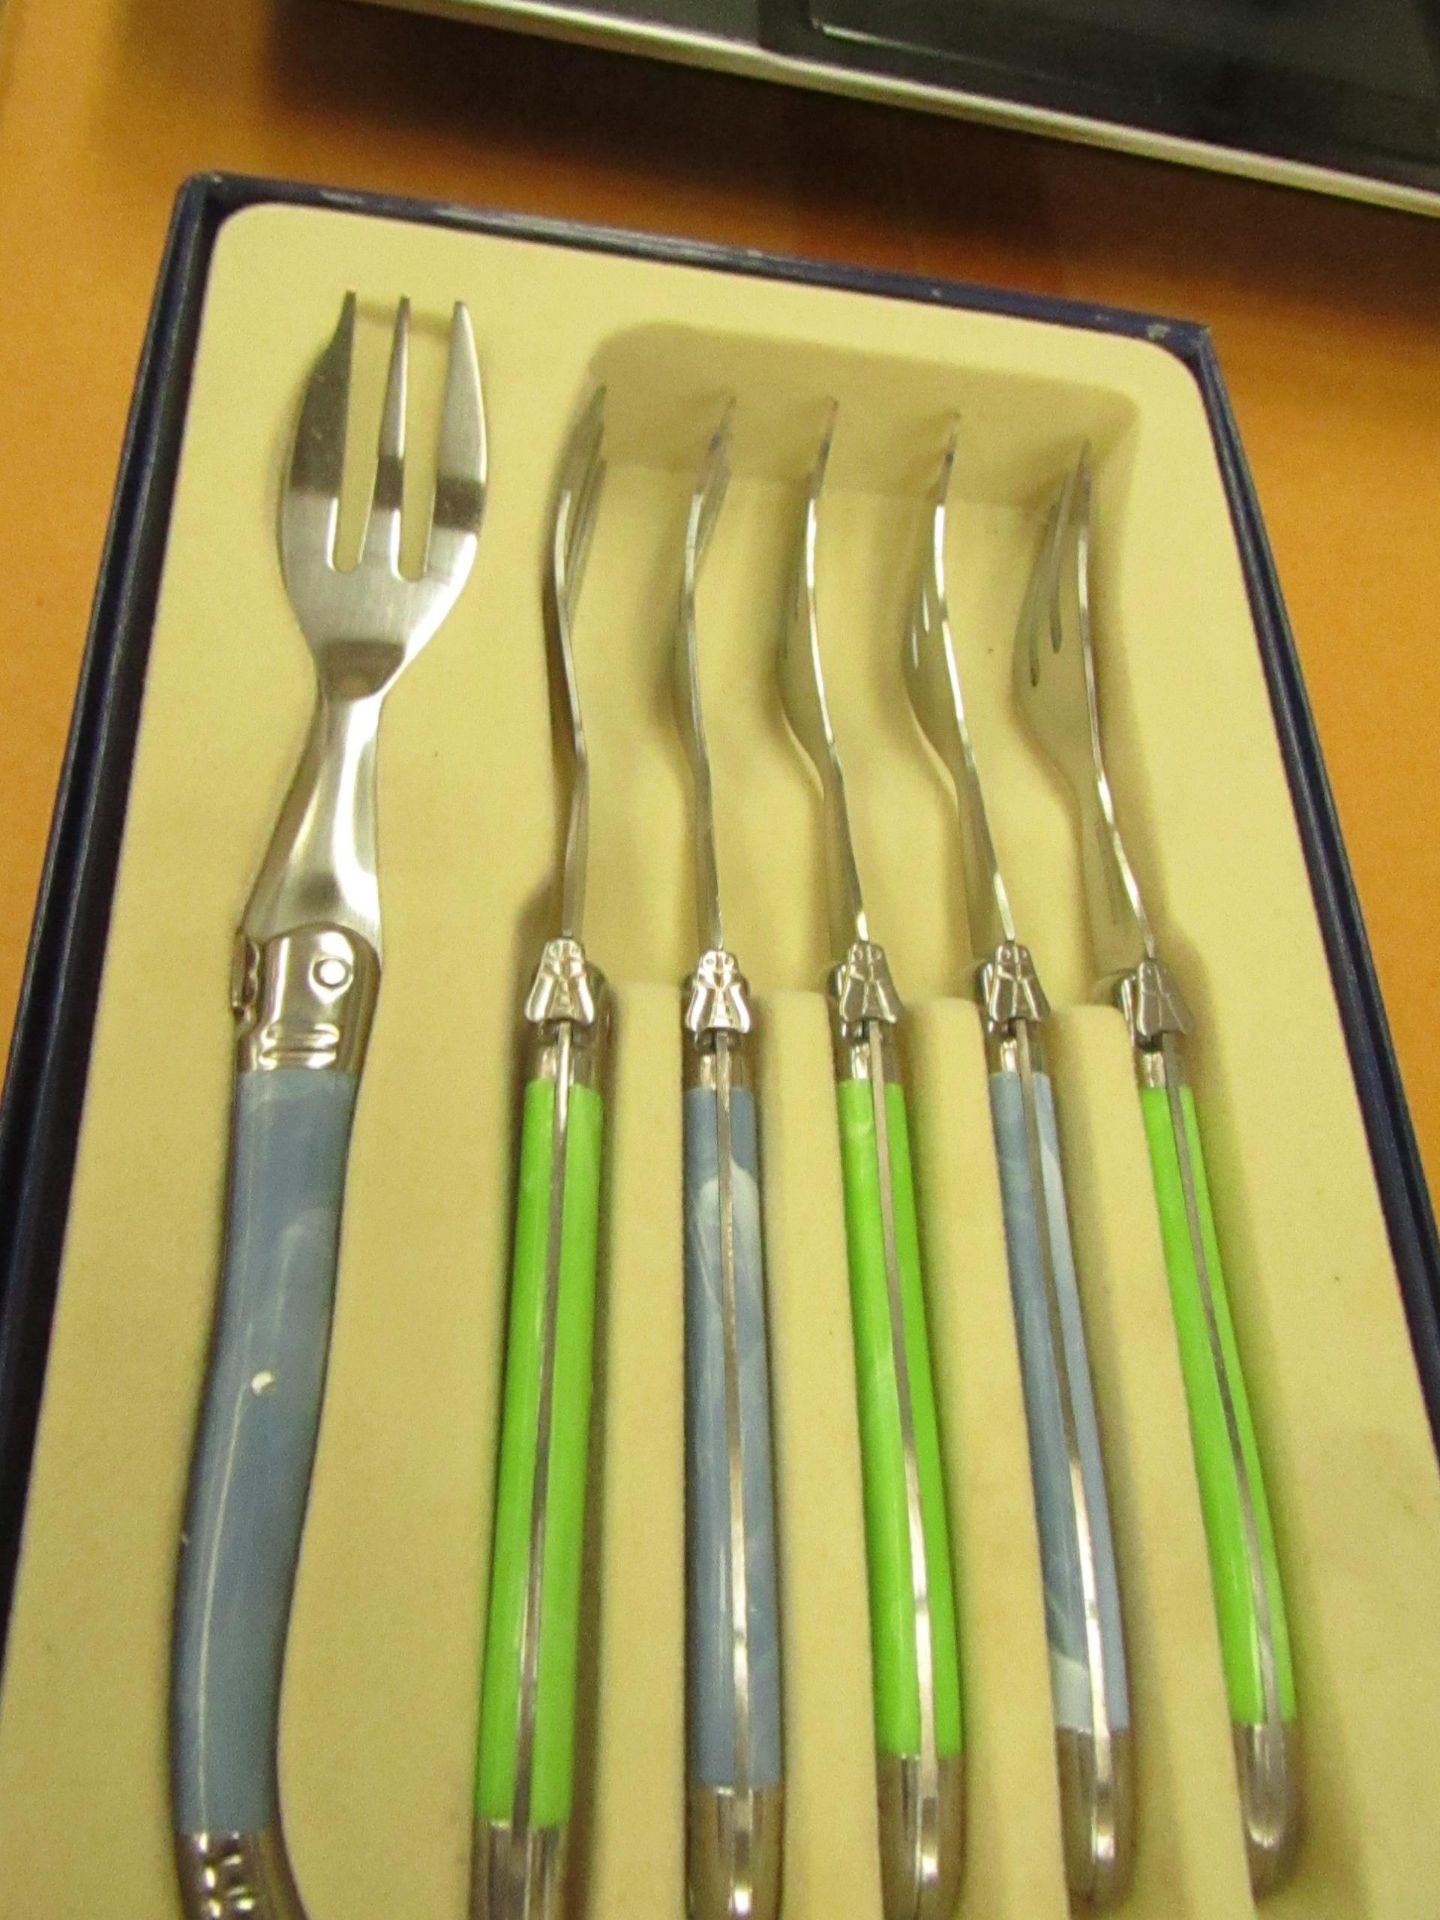 6X Laguiole Cake Fork set new and boxed